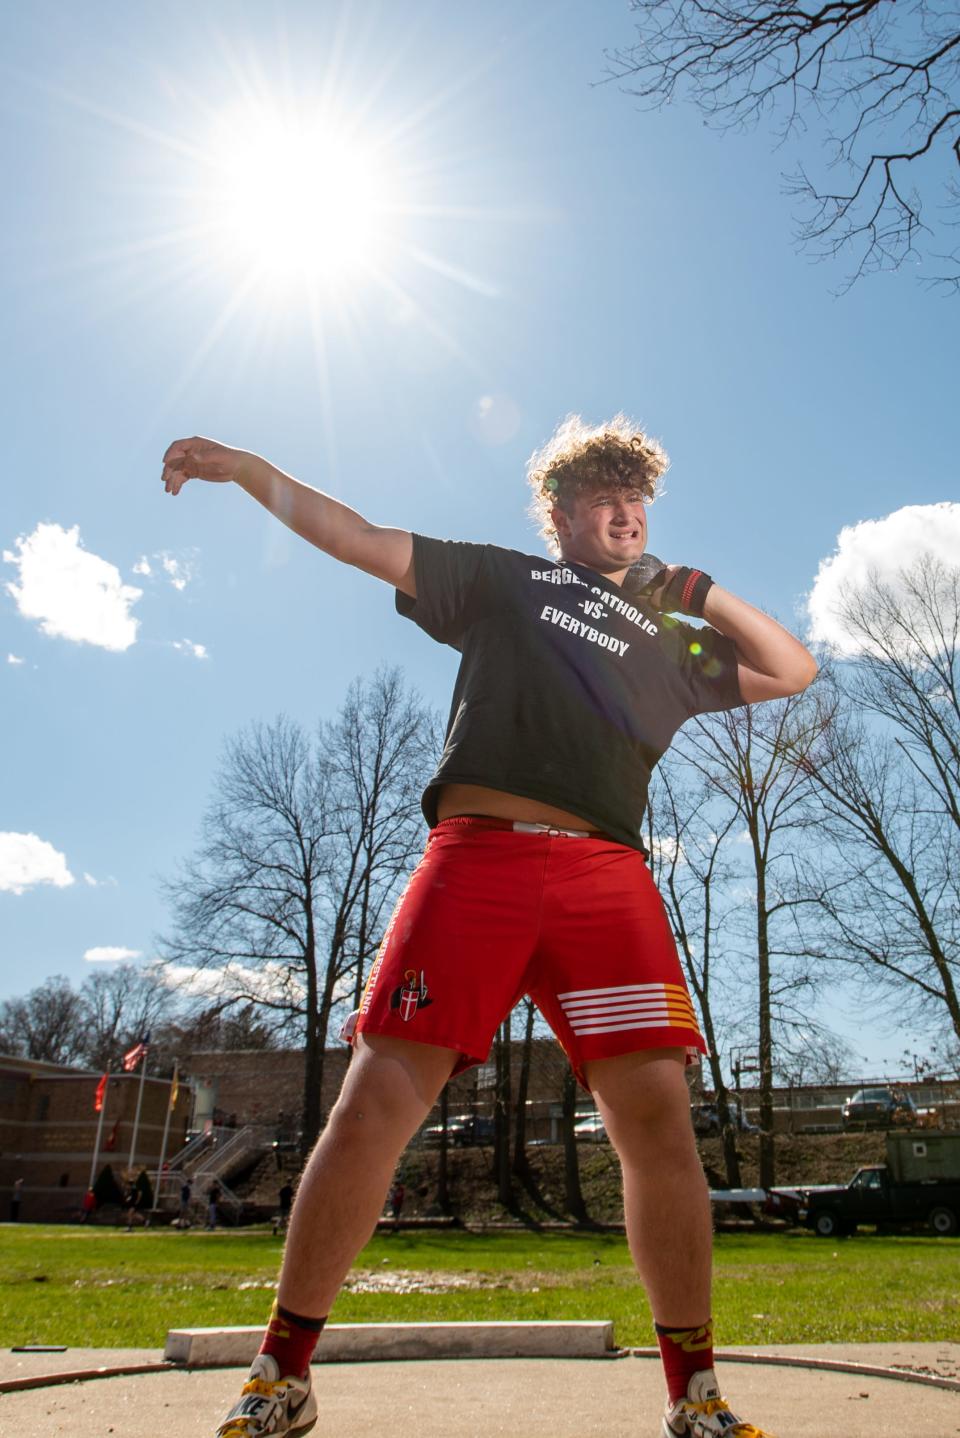 April 8, 2022; Oradell, NJ, USA; Benjamin "Benji" Shue, a freshman at Bergen Catholic and the state discus record holder, during track and field practice at Bergen Catholic. Mandatory Credit: Anne-Marie Caruso/NorthJersey.com via USA TODAY NETWORK